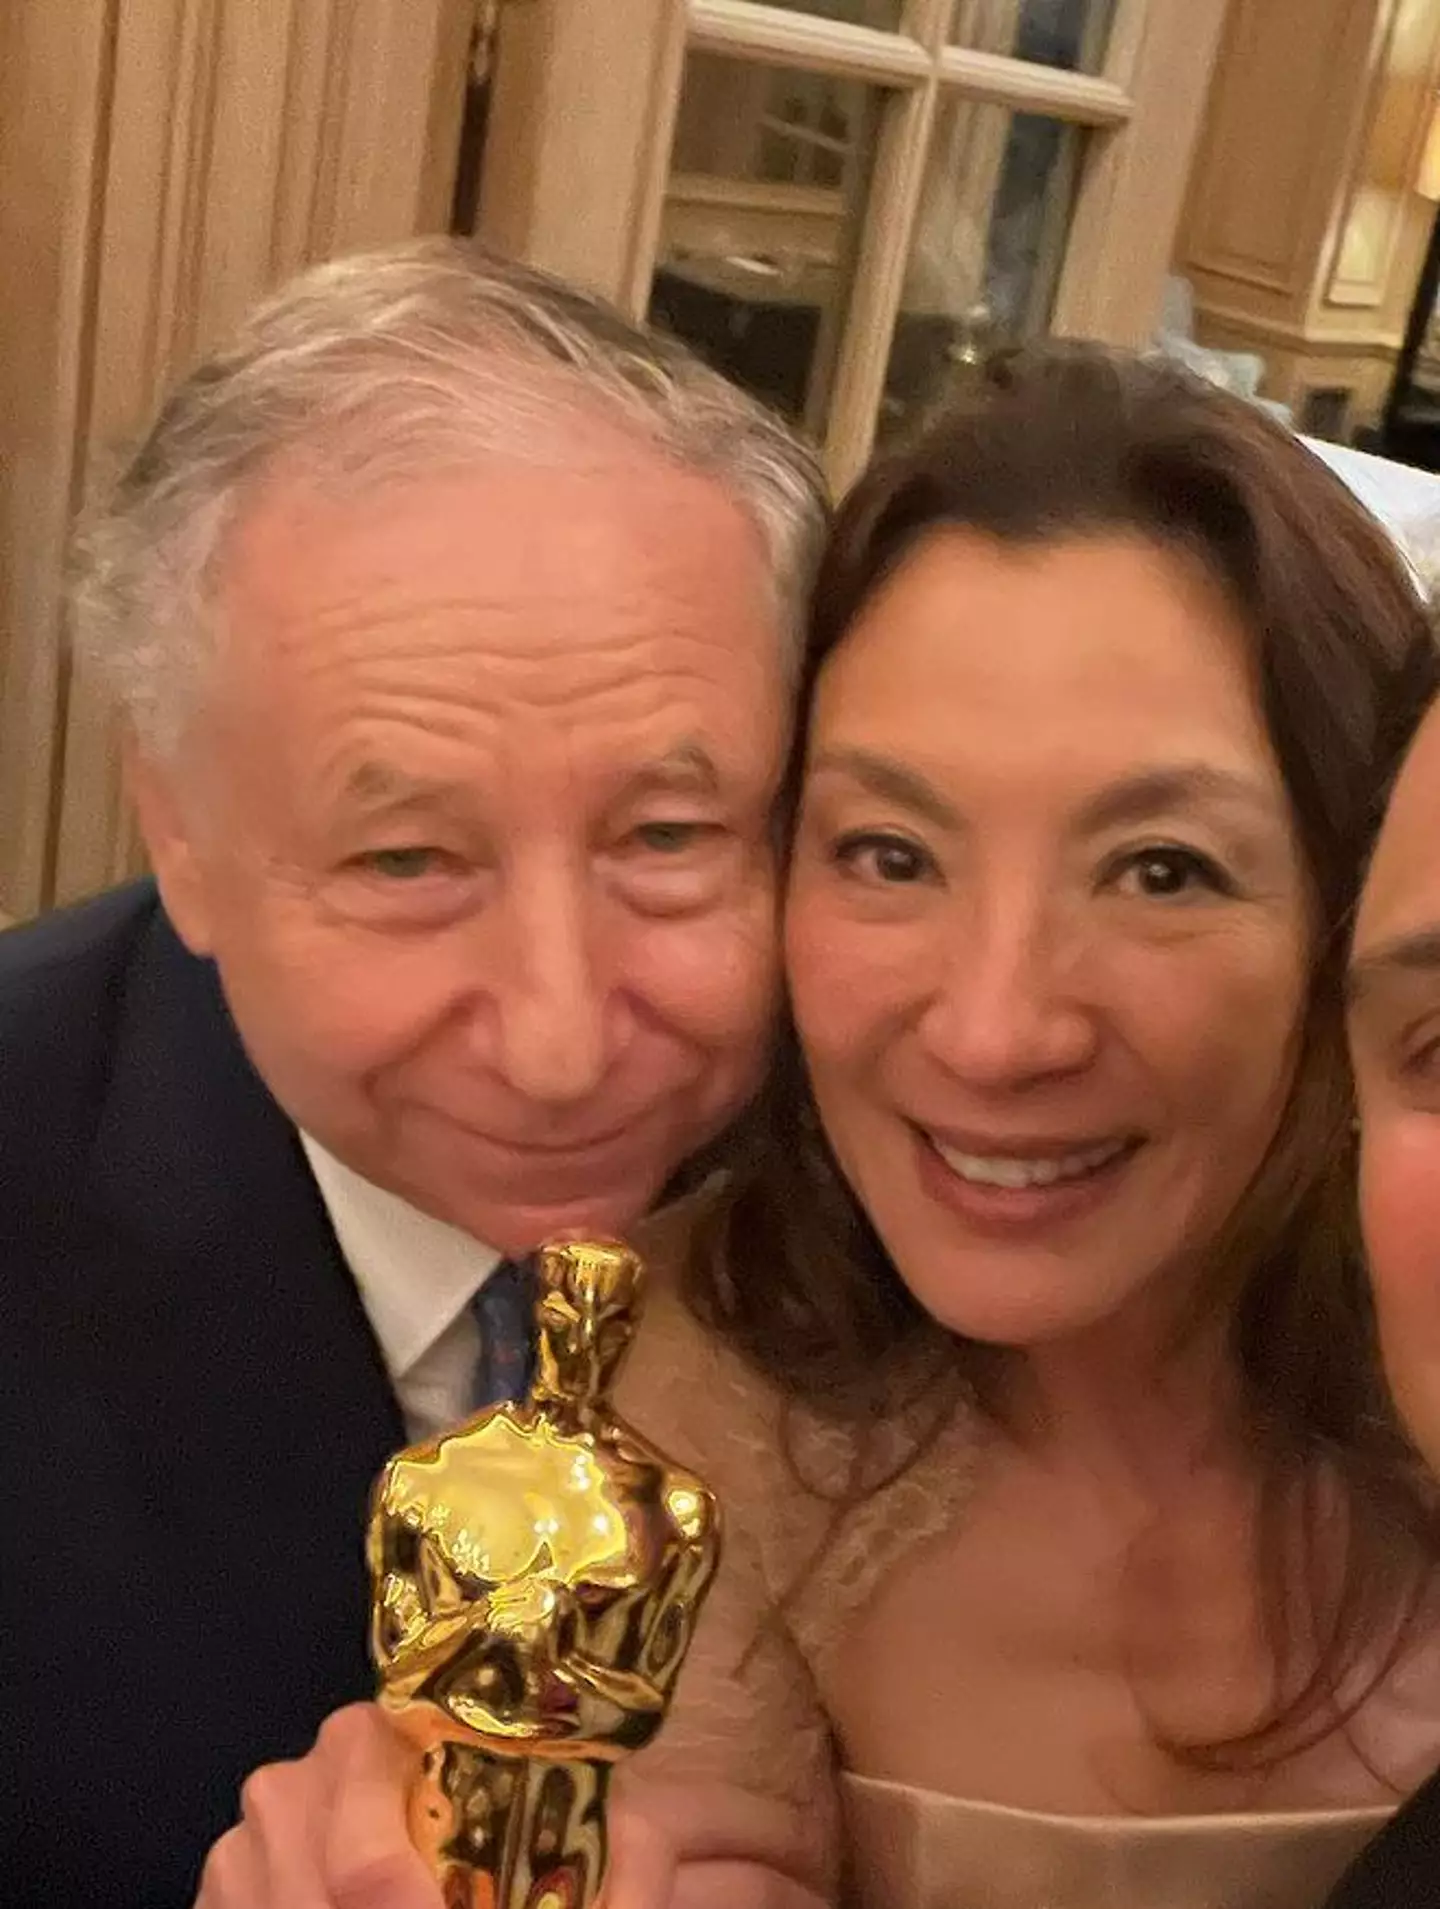 Yeoh and Todt married in Switzerland.